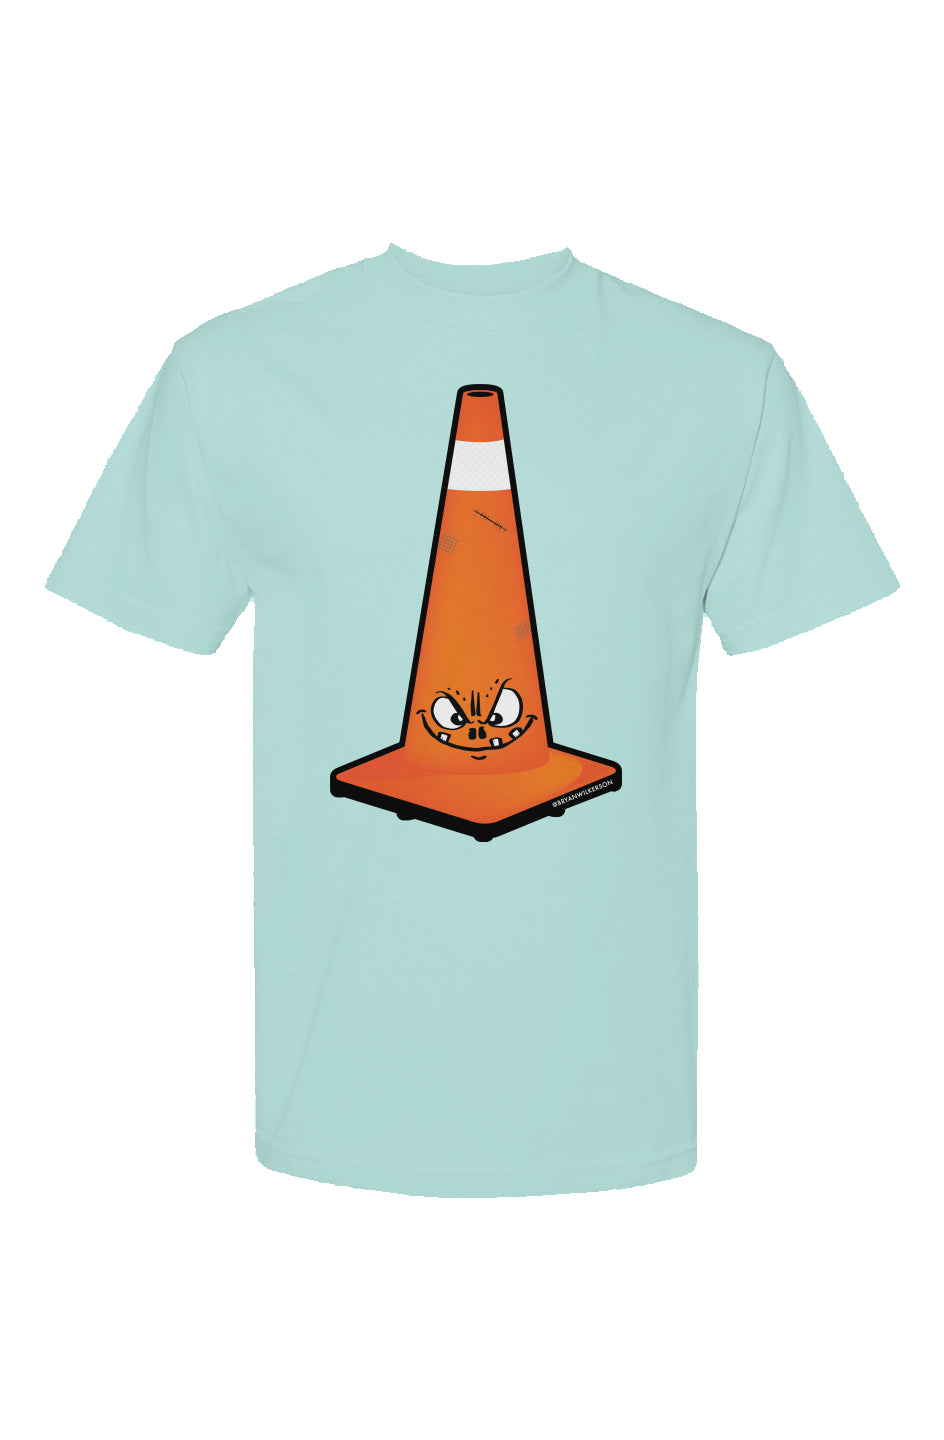 Snippy Cone Shirt